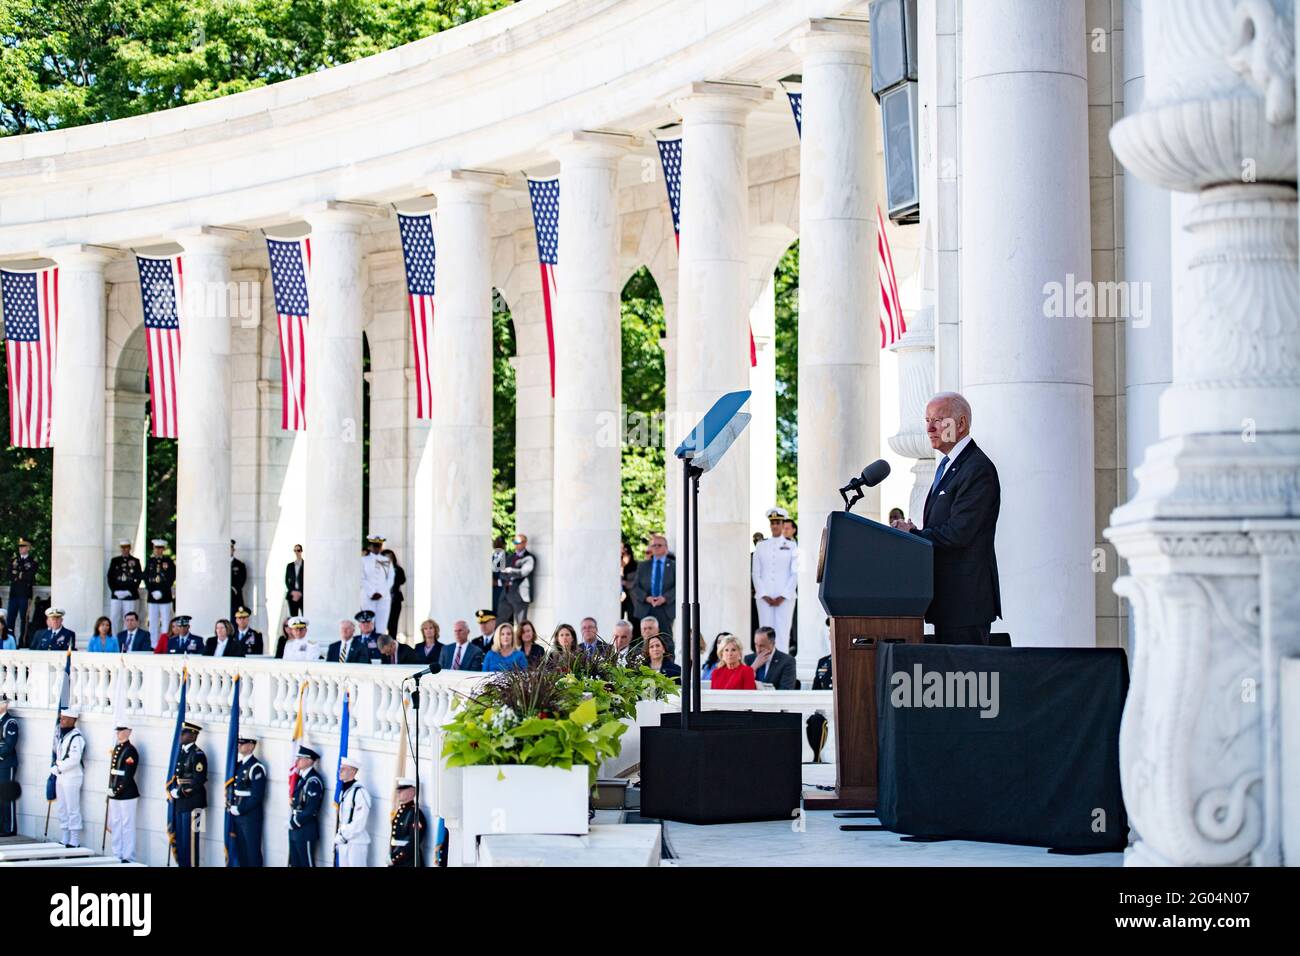 Arlington, United States Of America. 31st May, 2021. U.S President Joe Biden, delivers his address during the annual Memorial Day commemoration in the Memorial Amphitheater at Arlington National Cemetery May 31, 2021 Arlington, Virginia. Credit: Planetpix/Alamy Live News Stock Photo